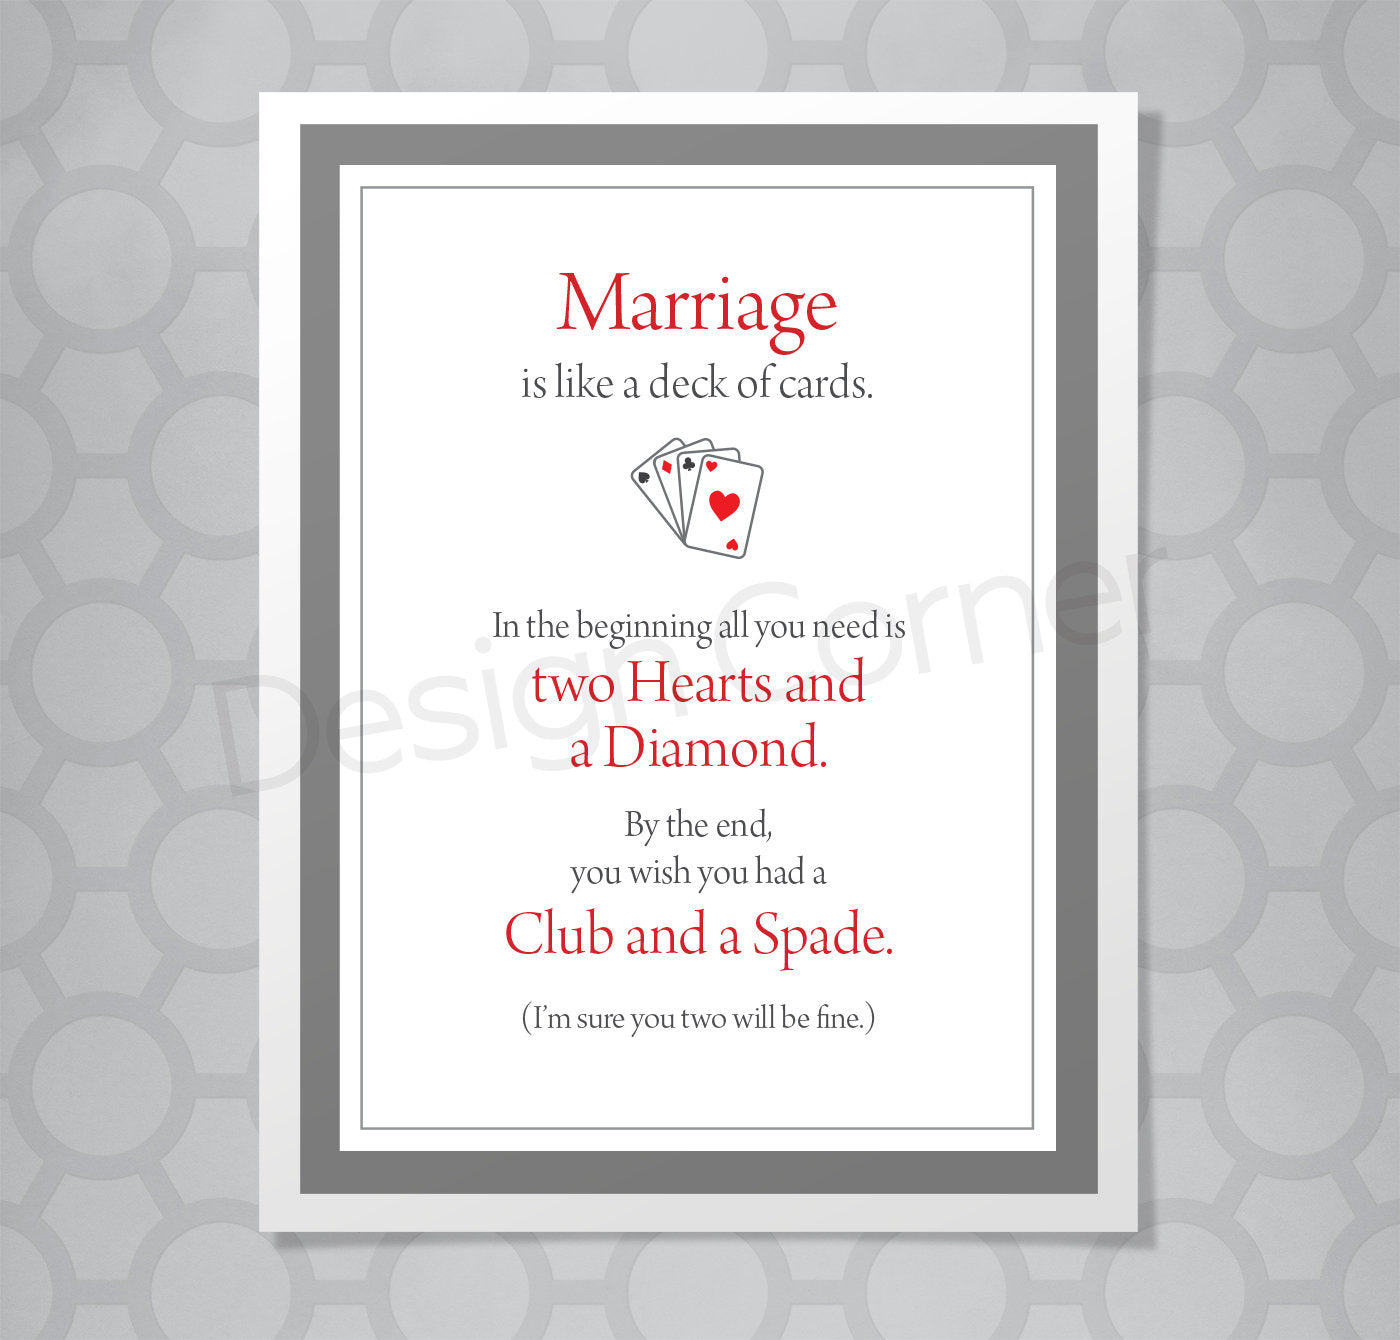 Marriage is like a Deck of Cards Wedding Card